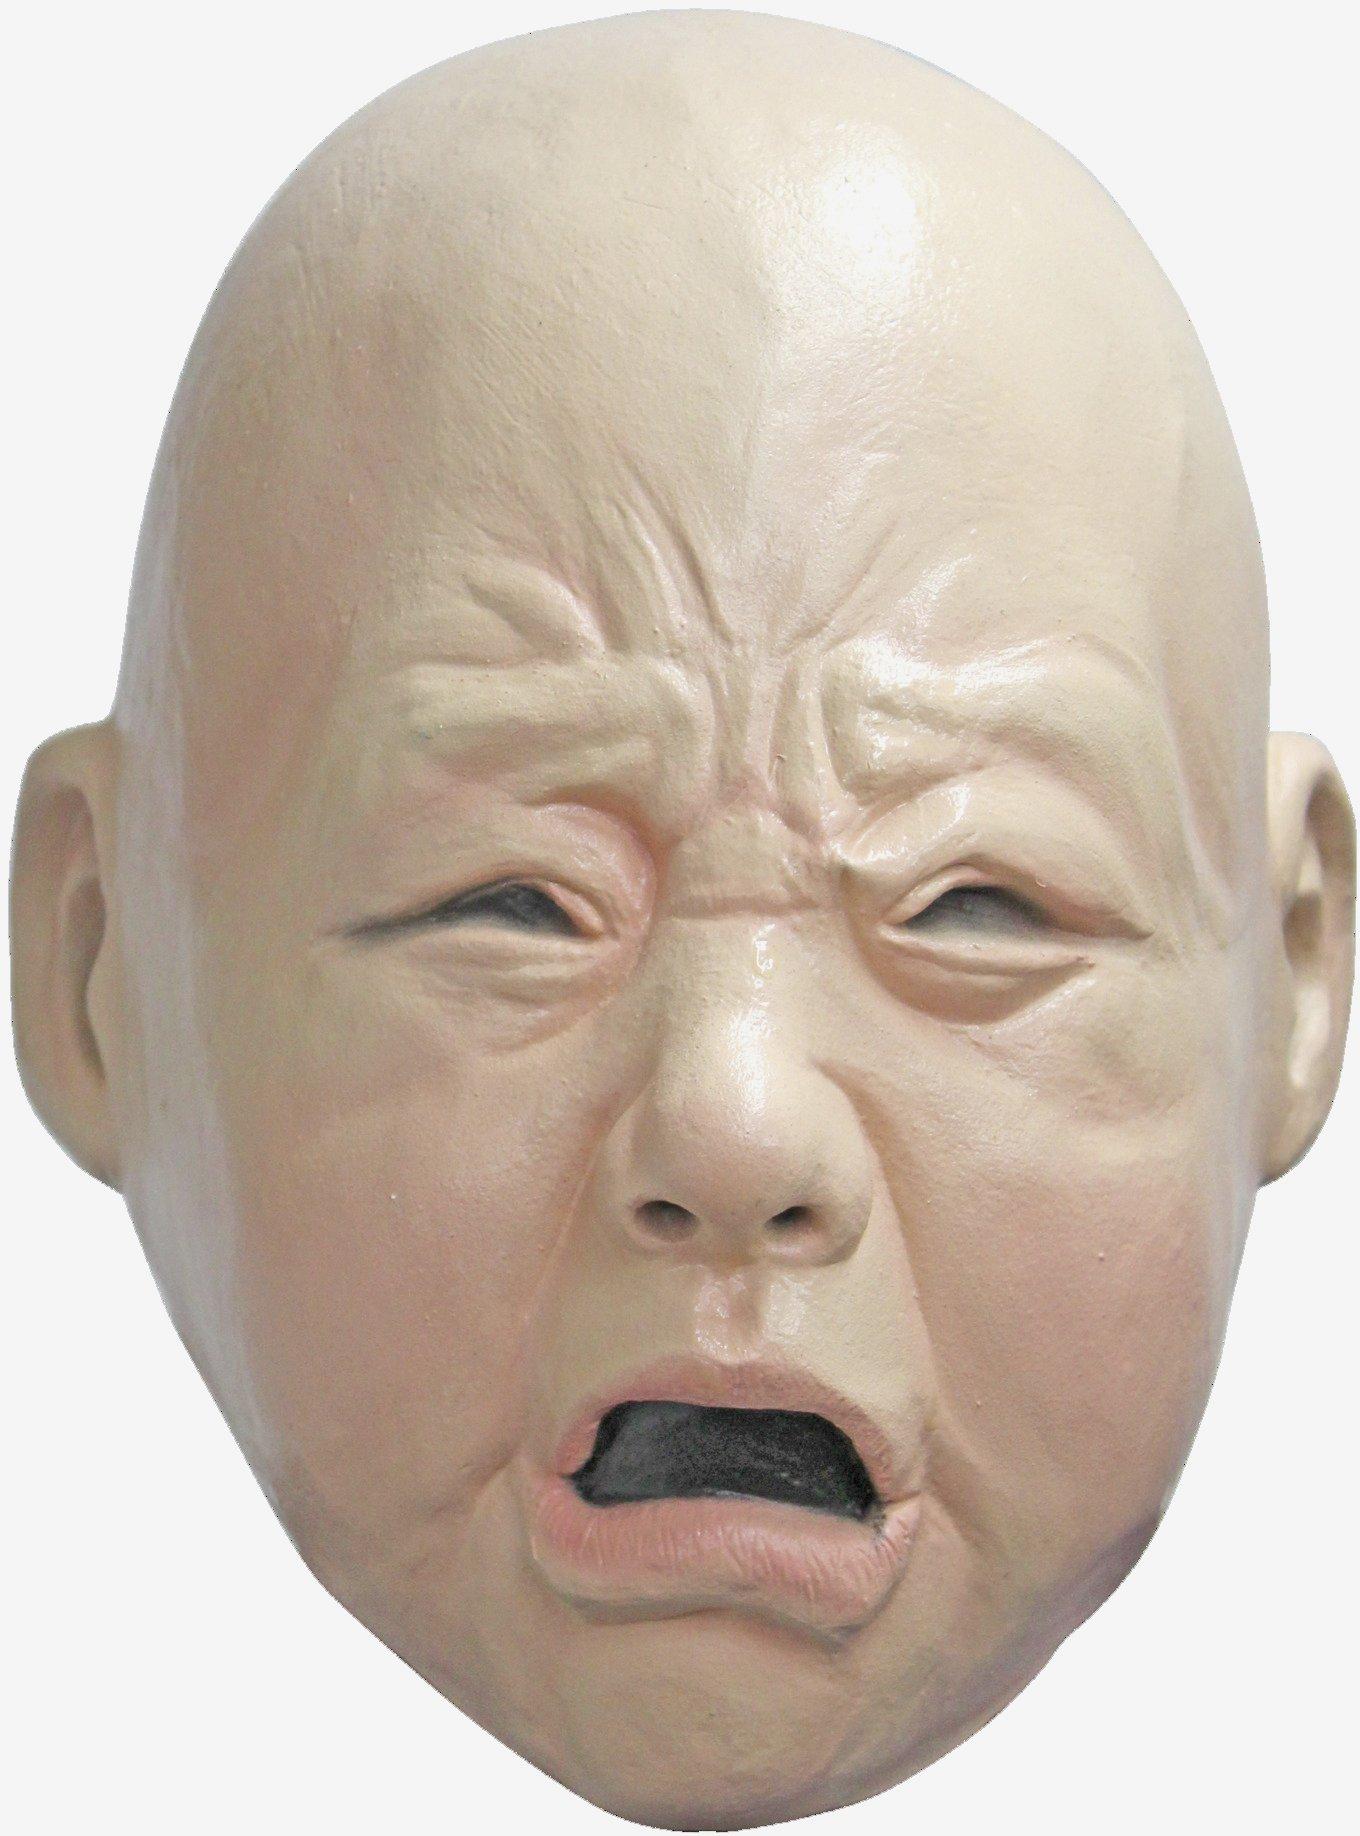 baby crying face mask